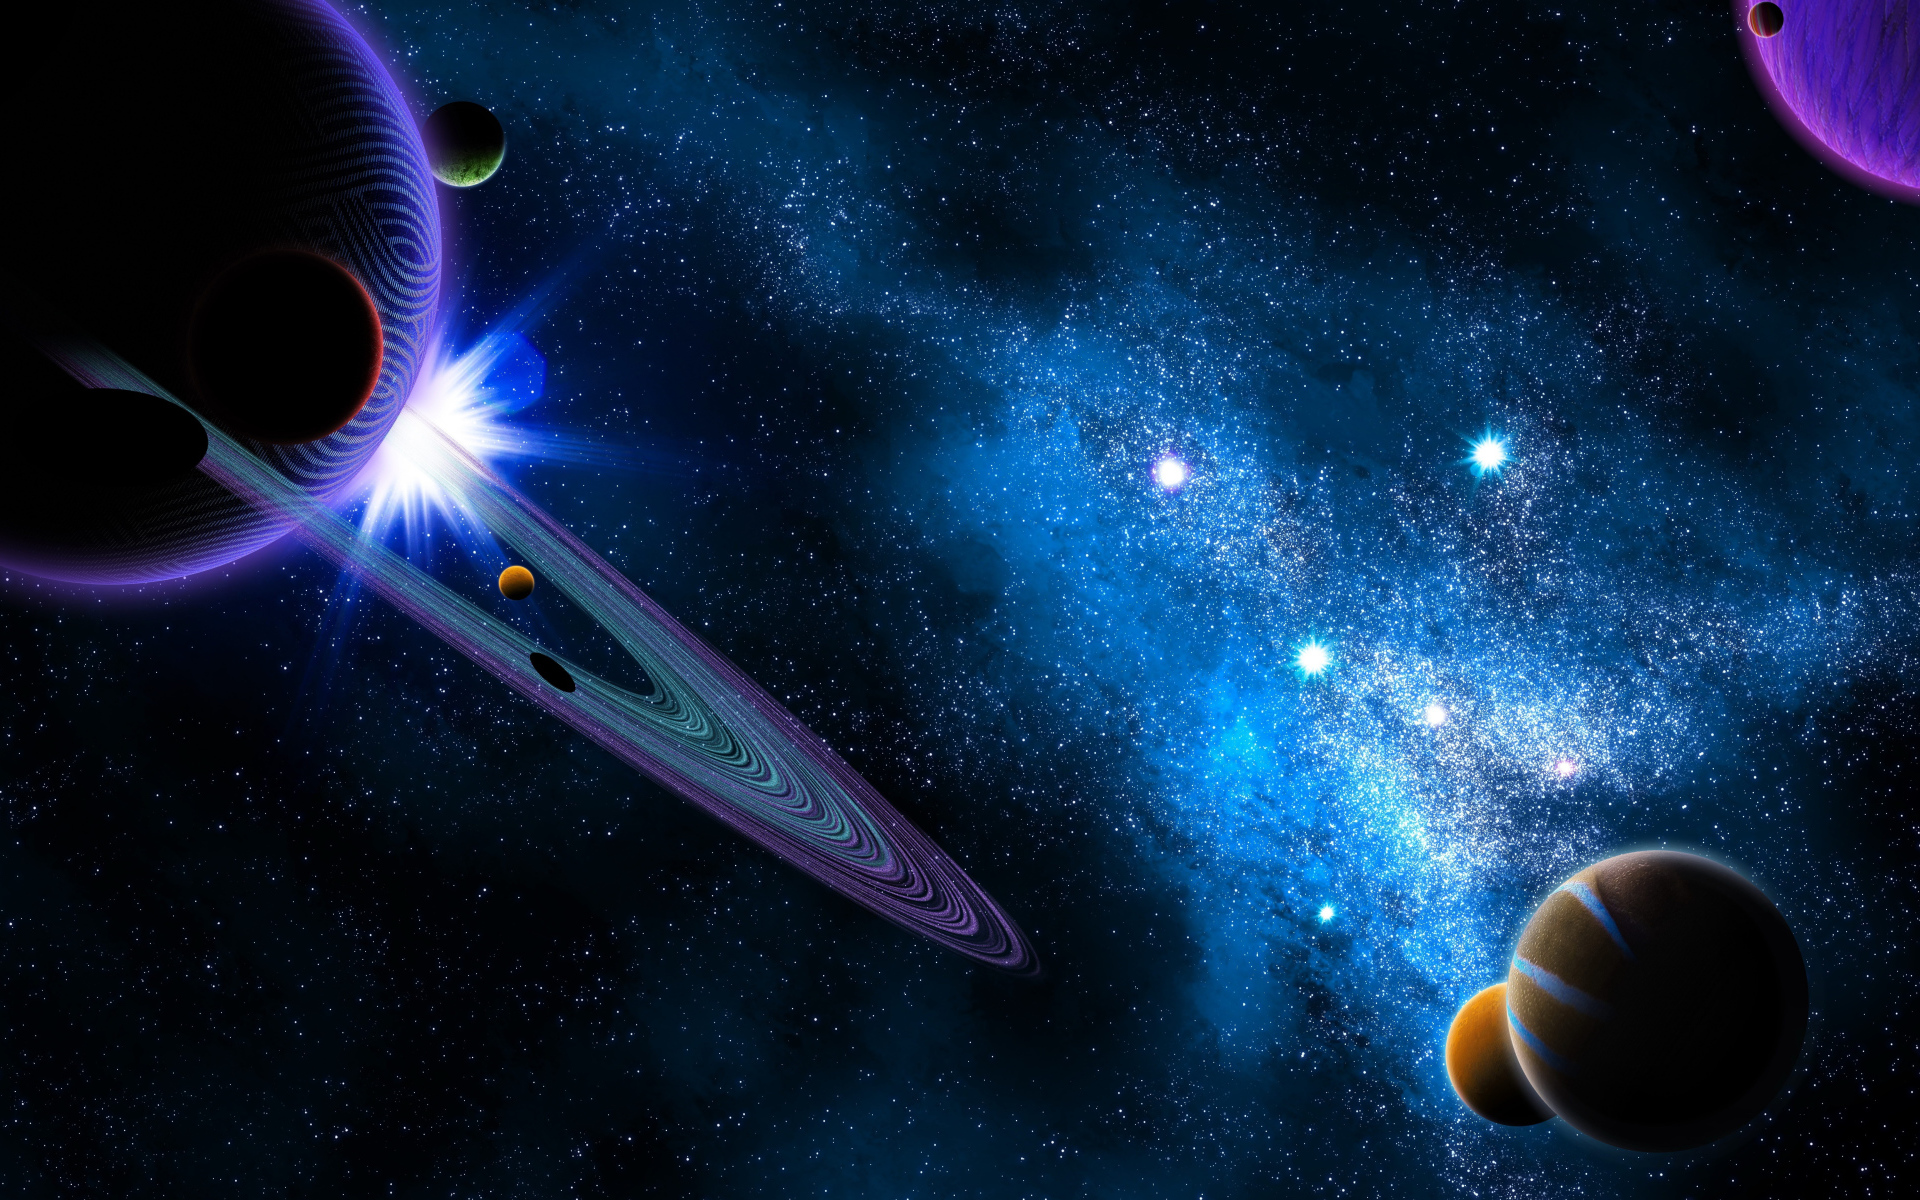 Planets of the solar system in space with the Milky Way